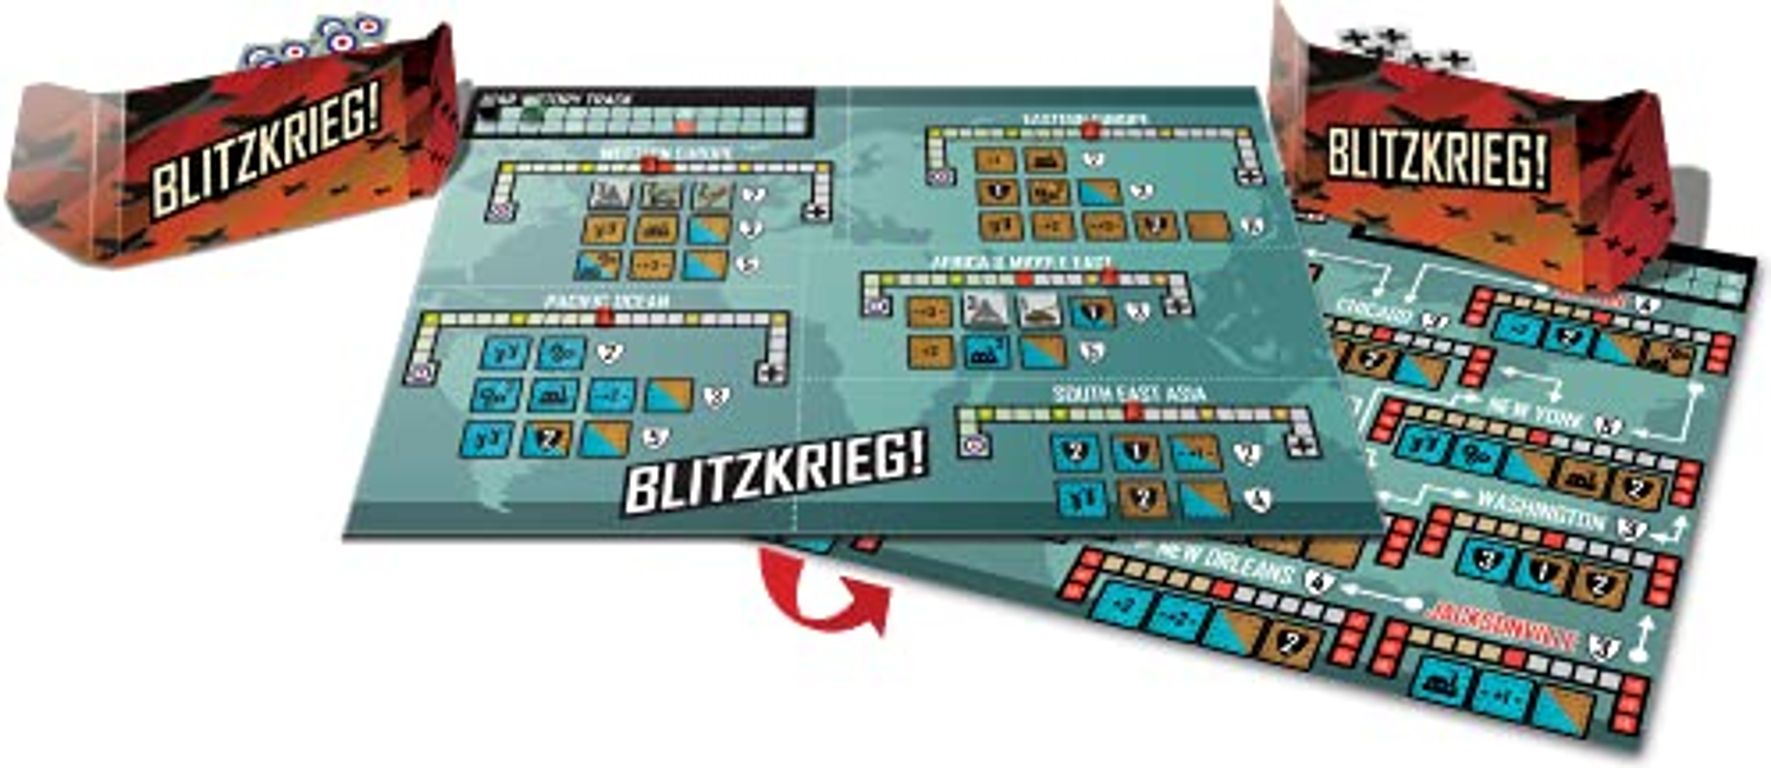 Blitzkrieg: Combined Edition components